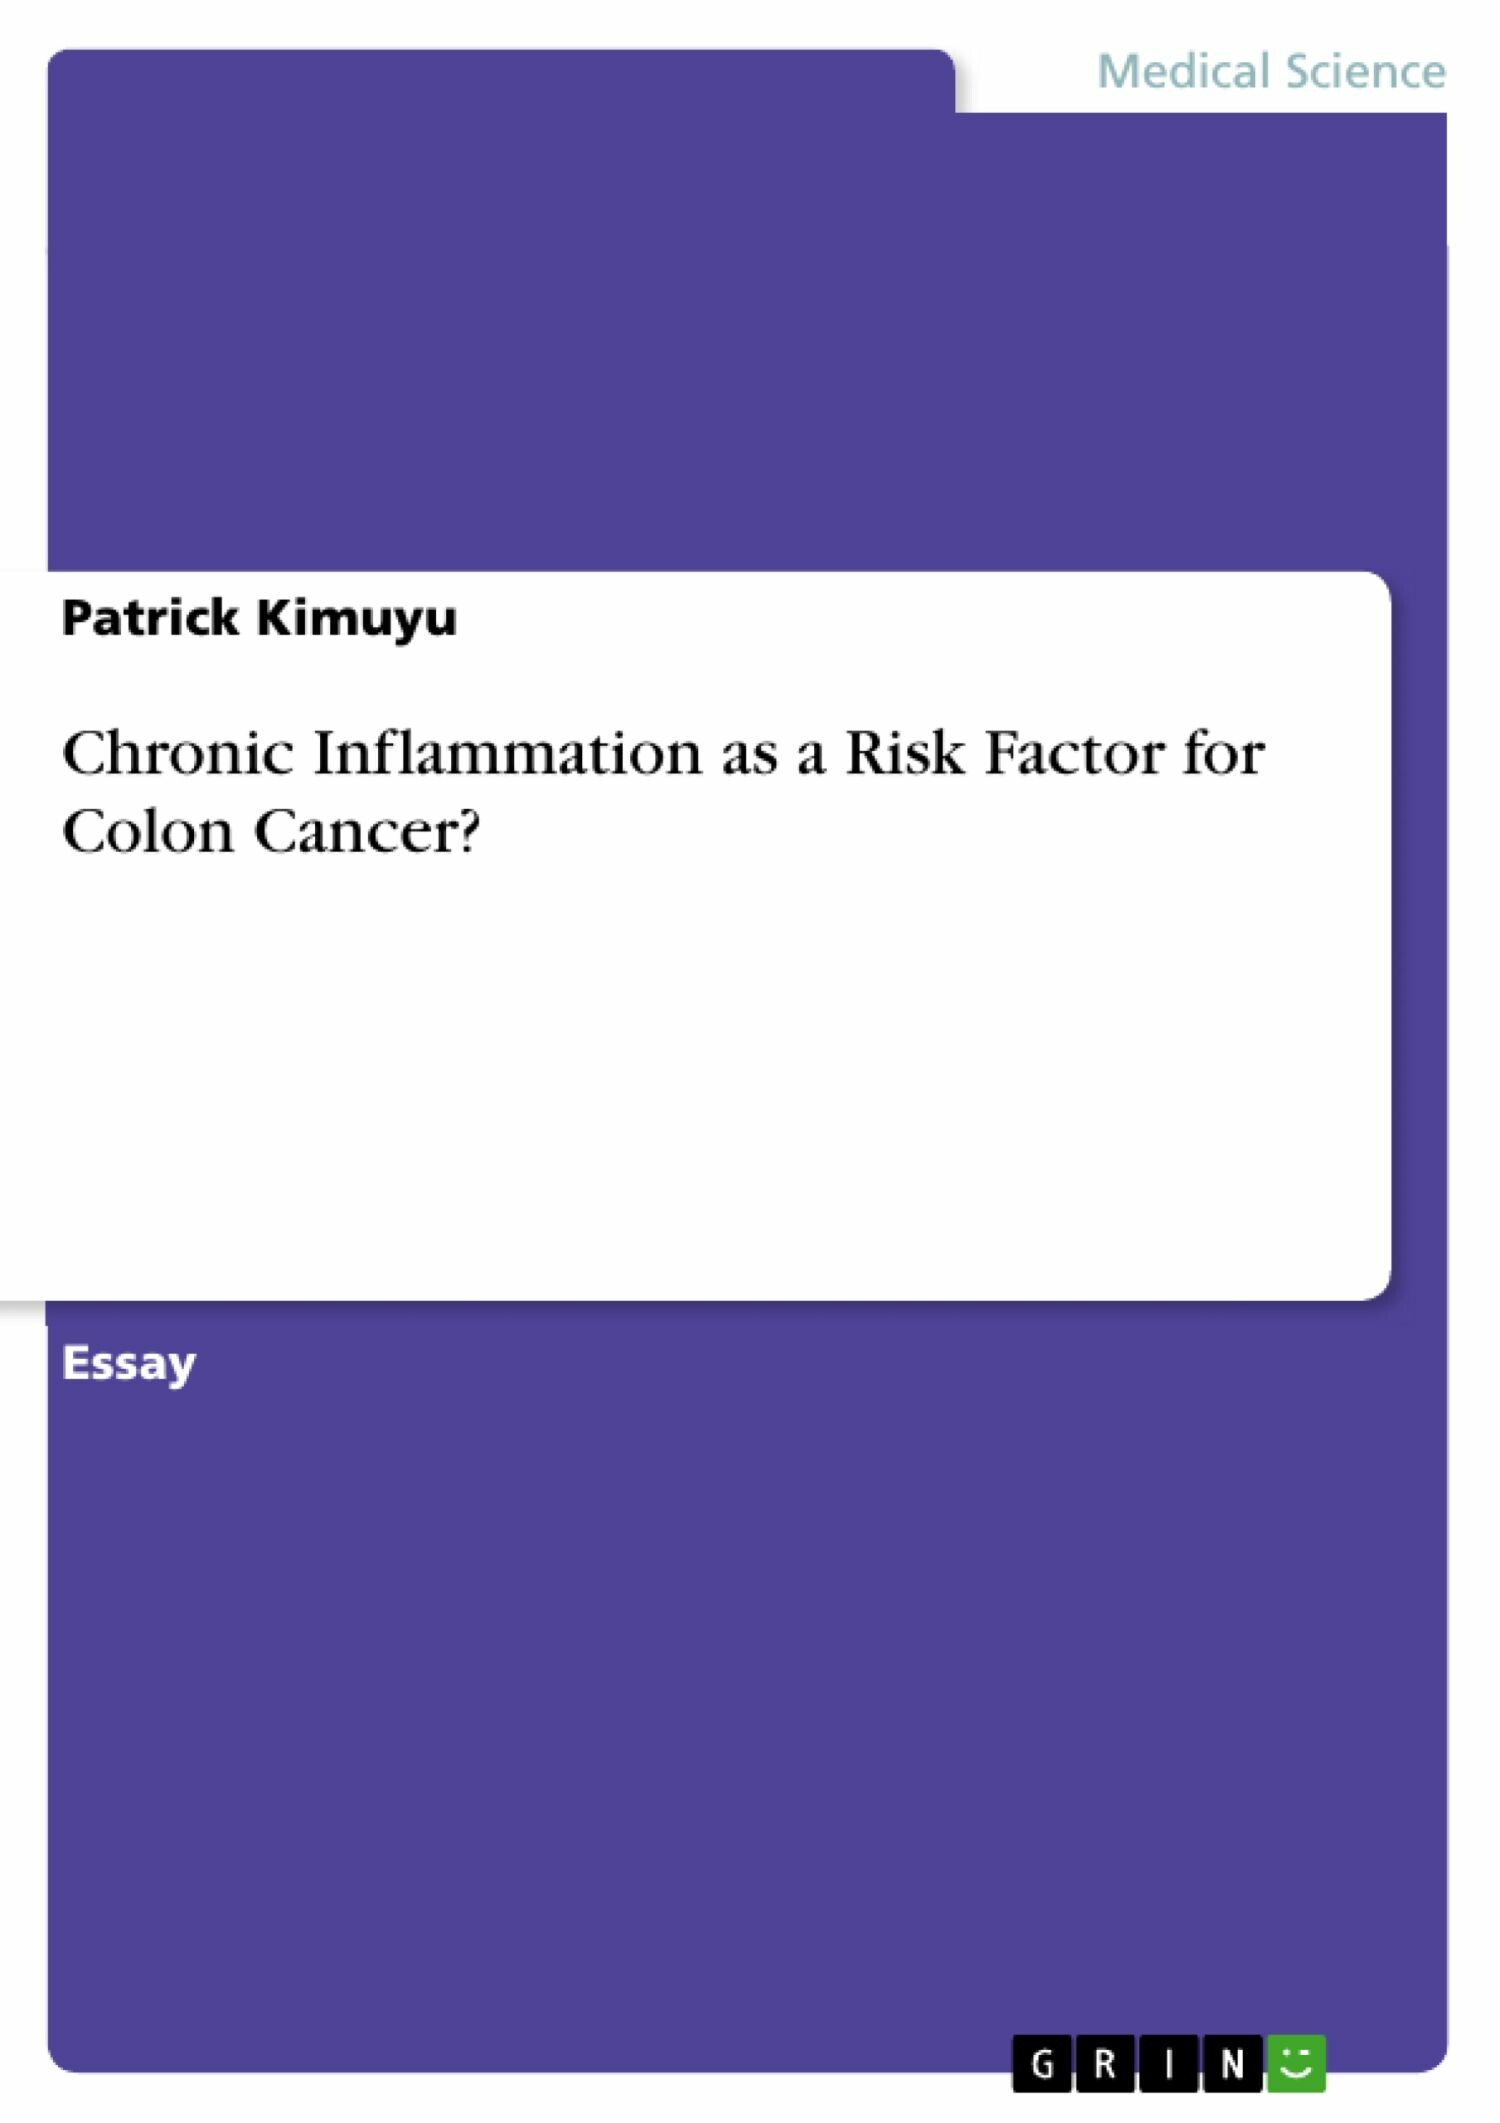 Chronic Inflammation as a Risk Factor for Colon Cancer?